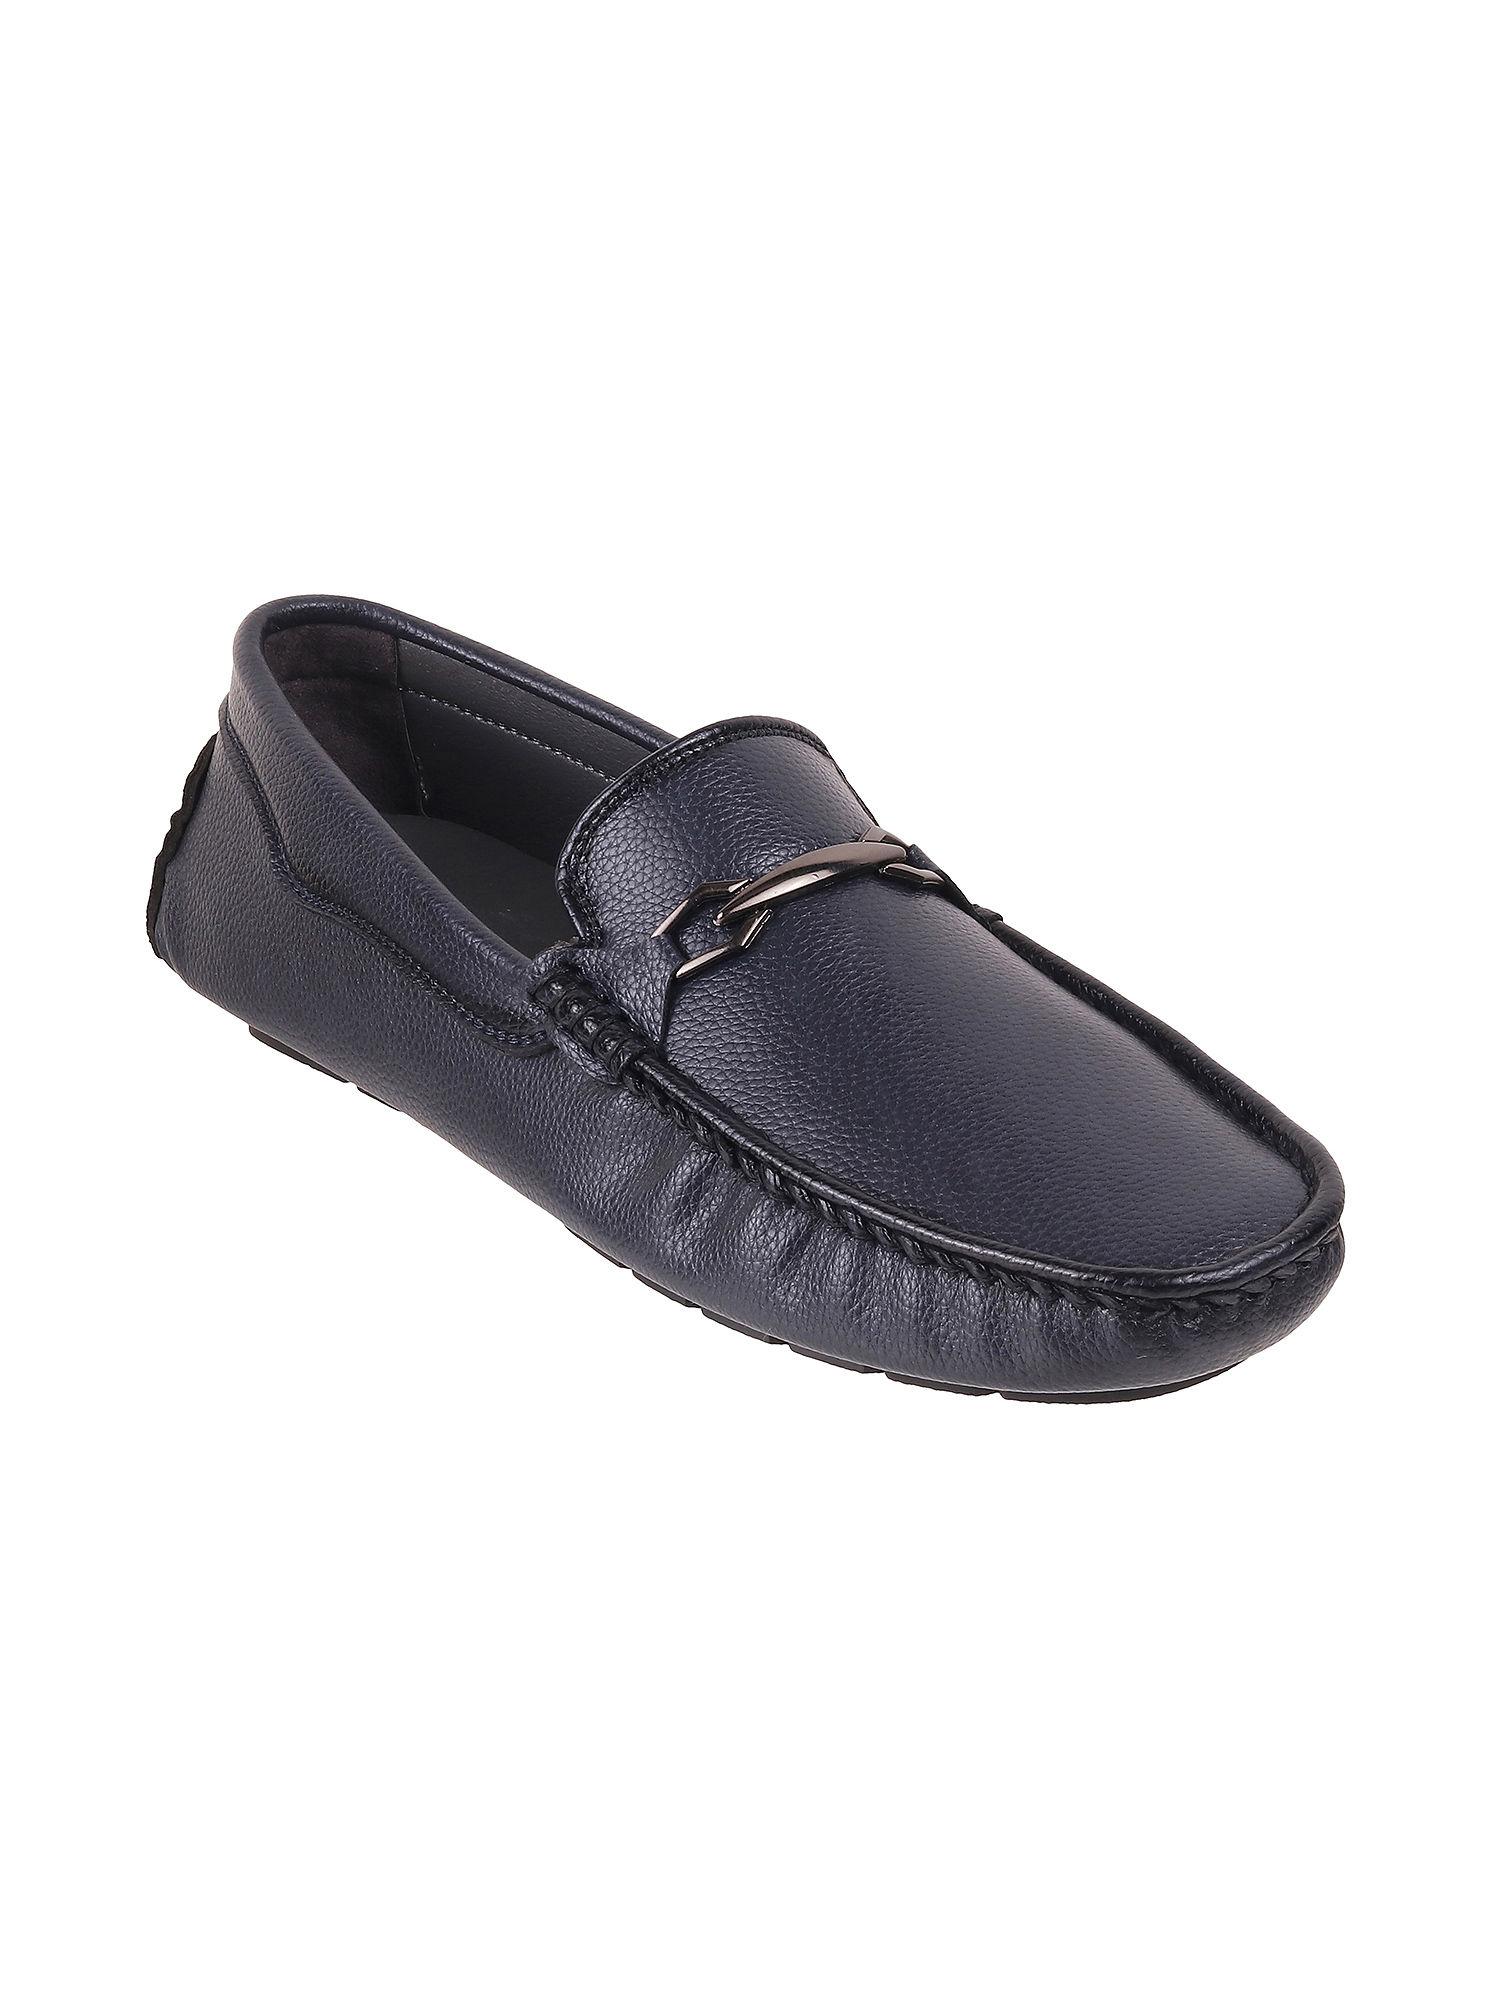 textured-mens-leather-blue-loafers